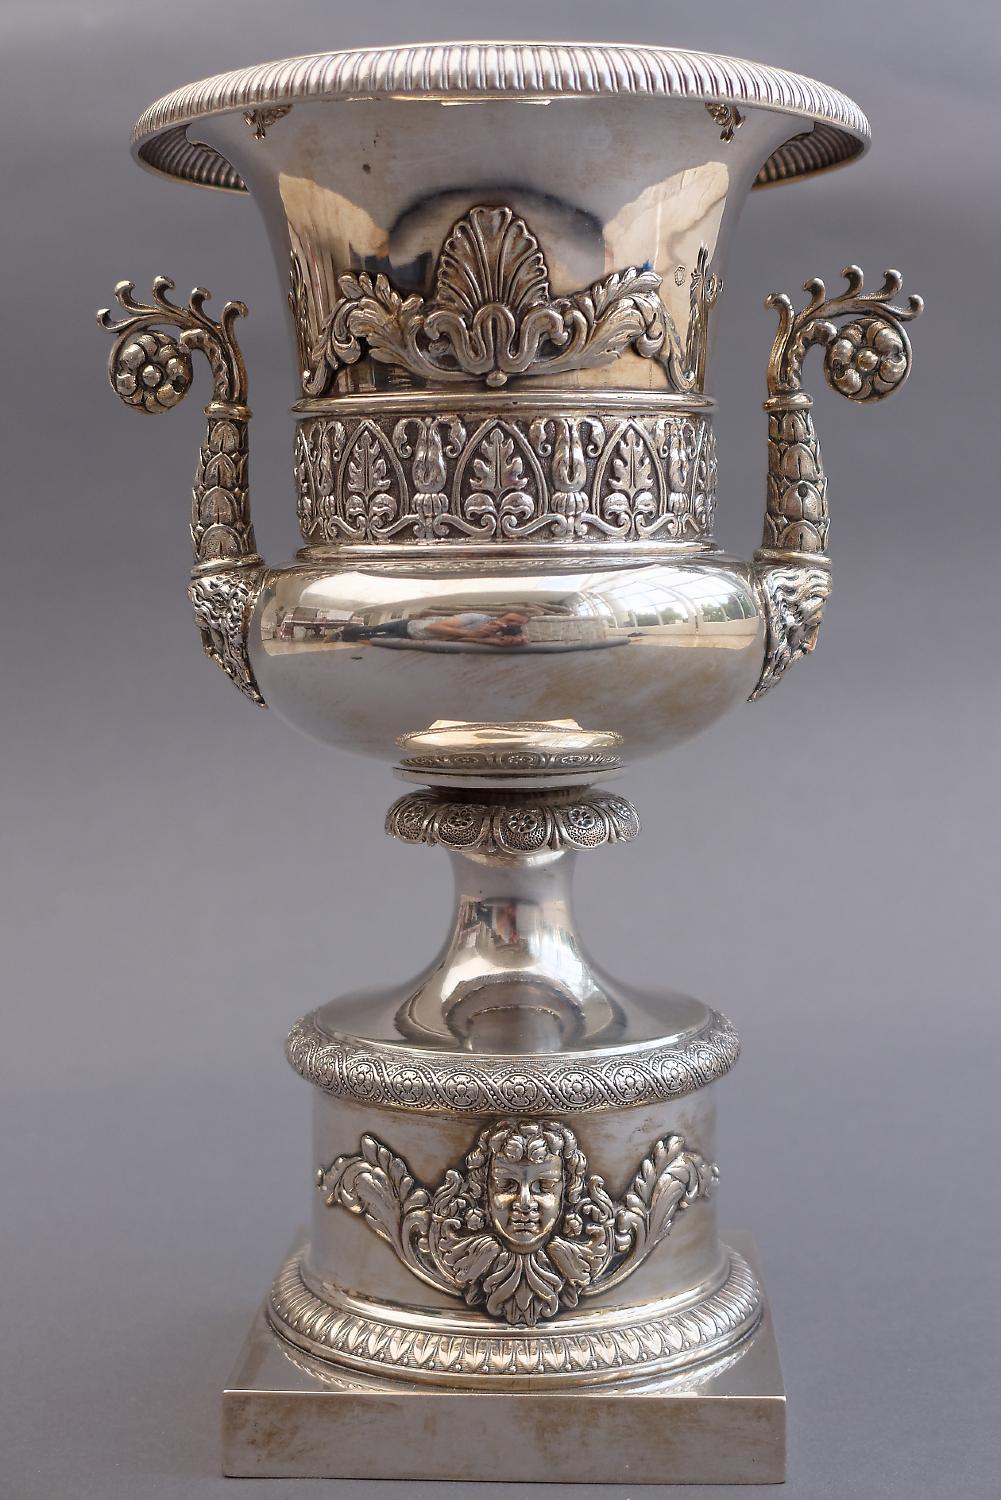 Early 19th Century Italian Neoclassical Silver Urn Vase Milan by Emanuele Caber For Sale 2